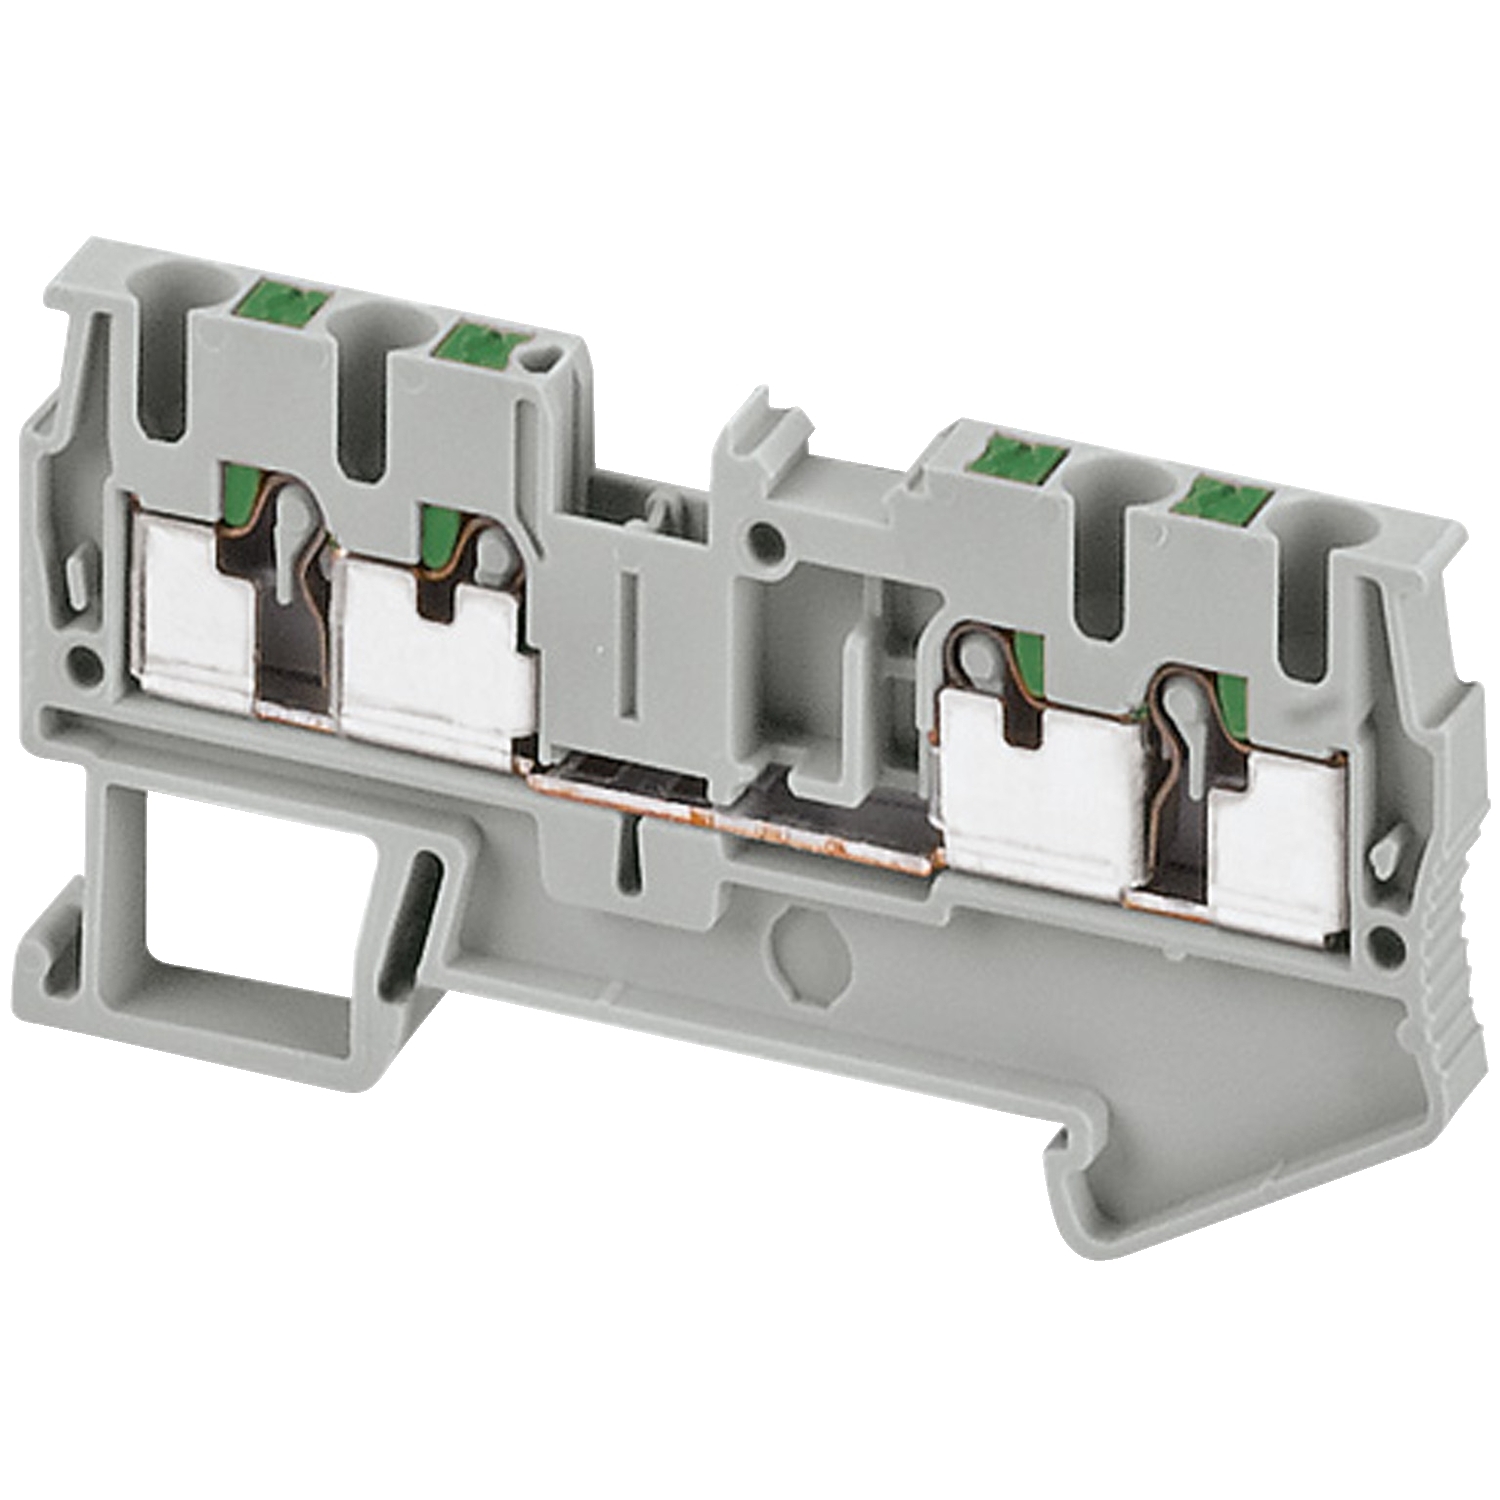 Terminal block, Linergy TR, push-in type, feed through, 4 points, 2.5mm², grey, set of 50